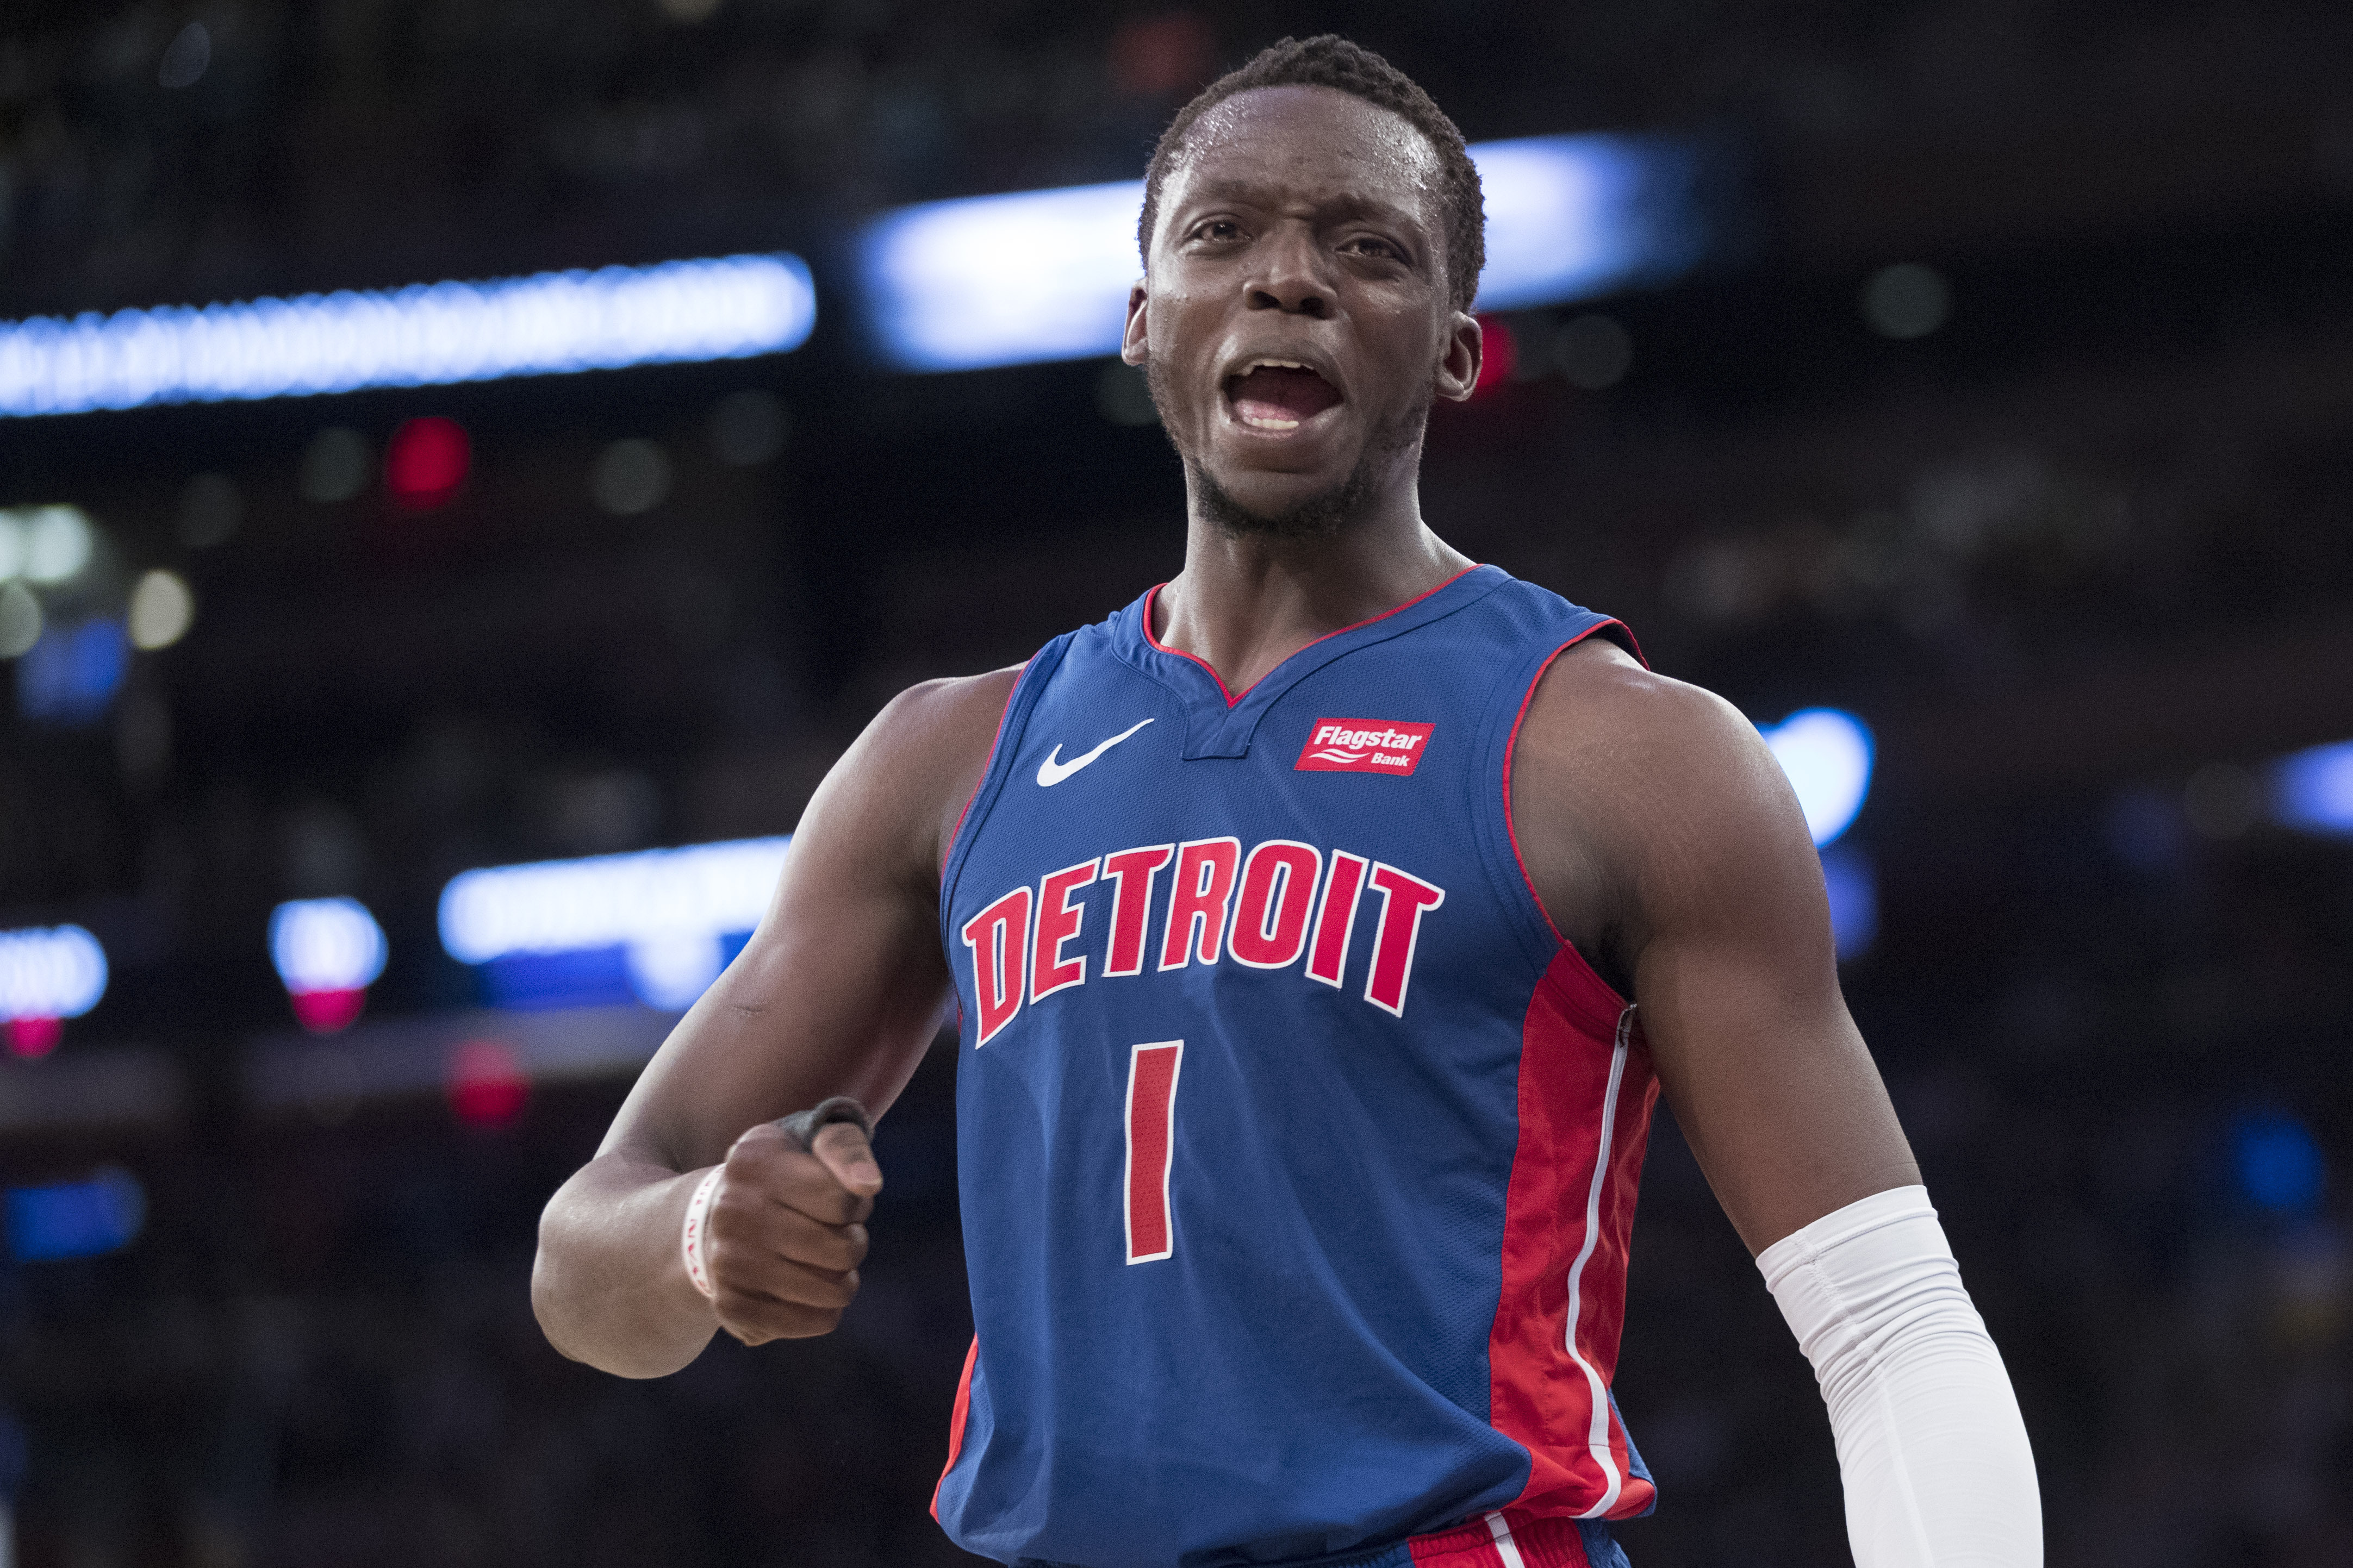 Pistons earn final playoff spot in East with win over Knicks